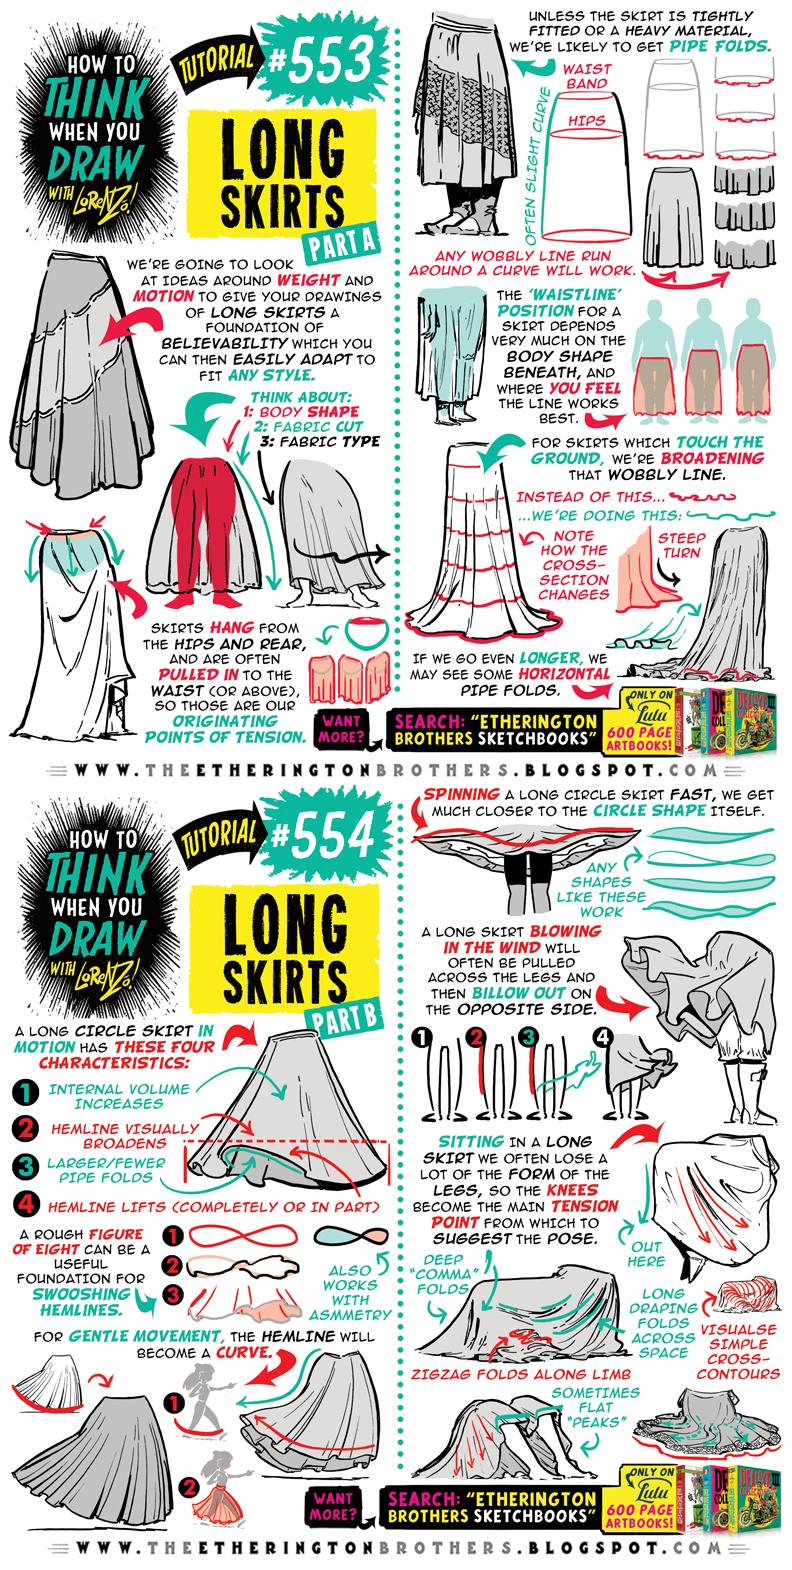 BRAND NEW TUTORIAL! LONG SKIRTS! by EtheringtonBrothers on DeviantArt